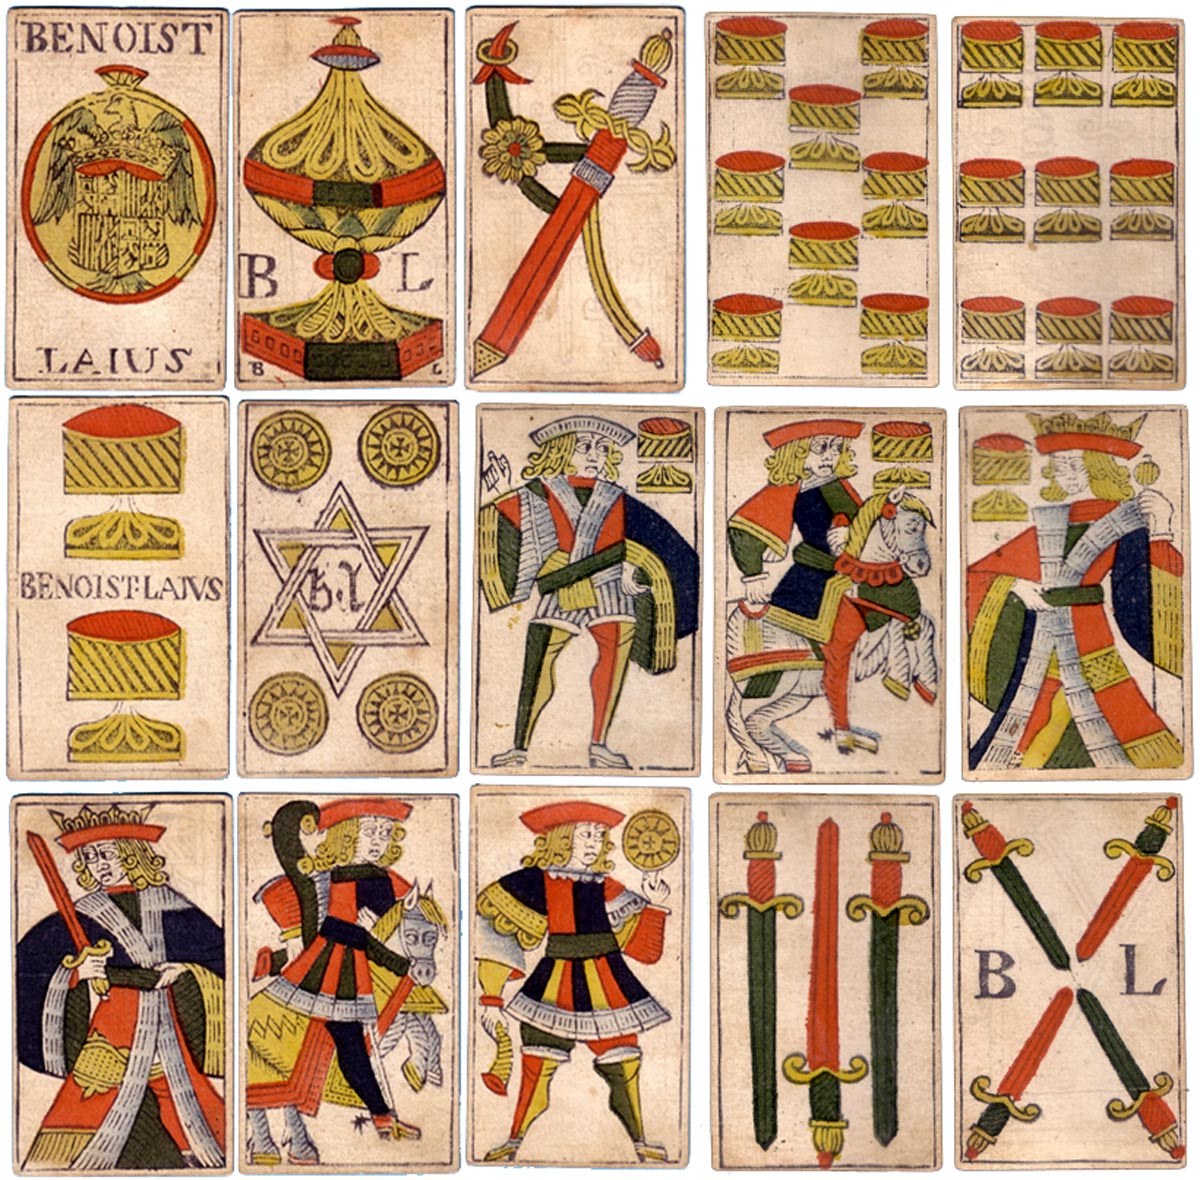 Spanish National pattern by Benoist Laius, Montpellier, 1706-1725